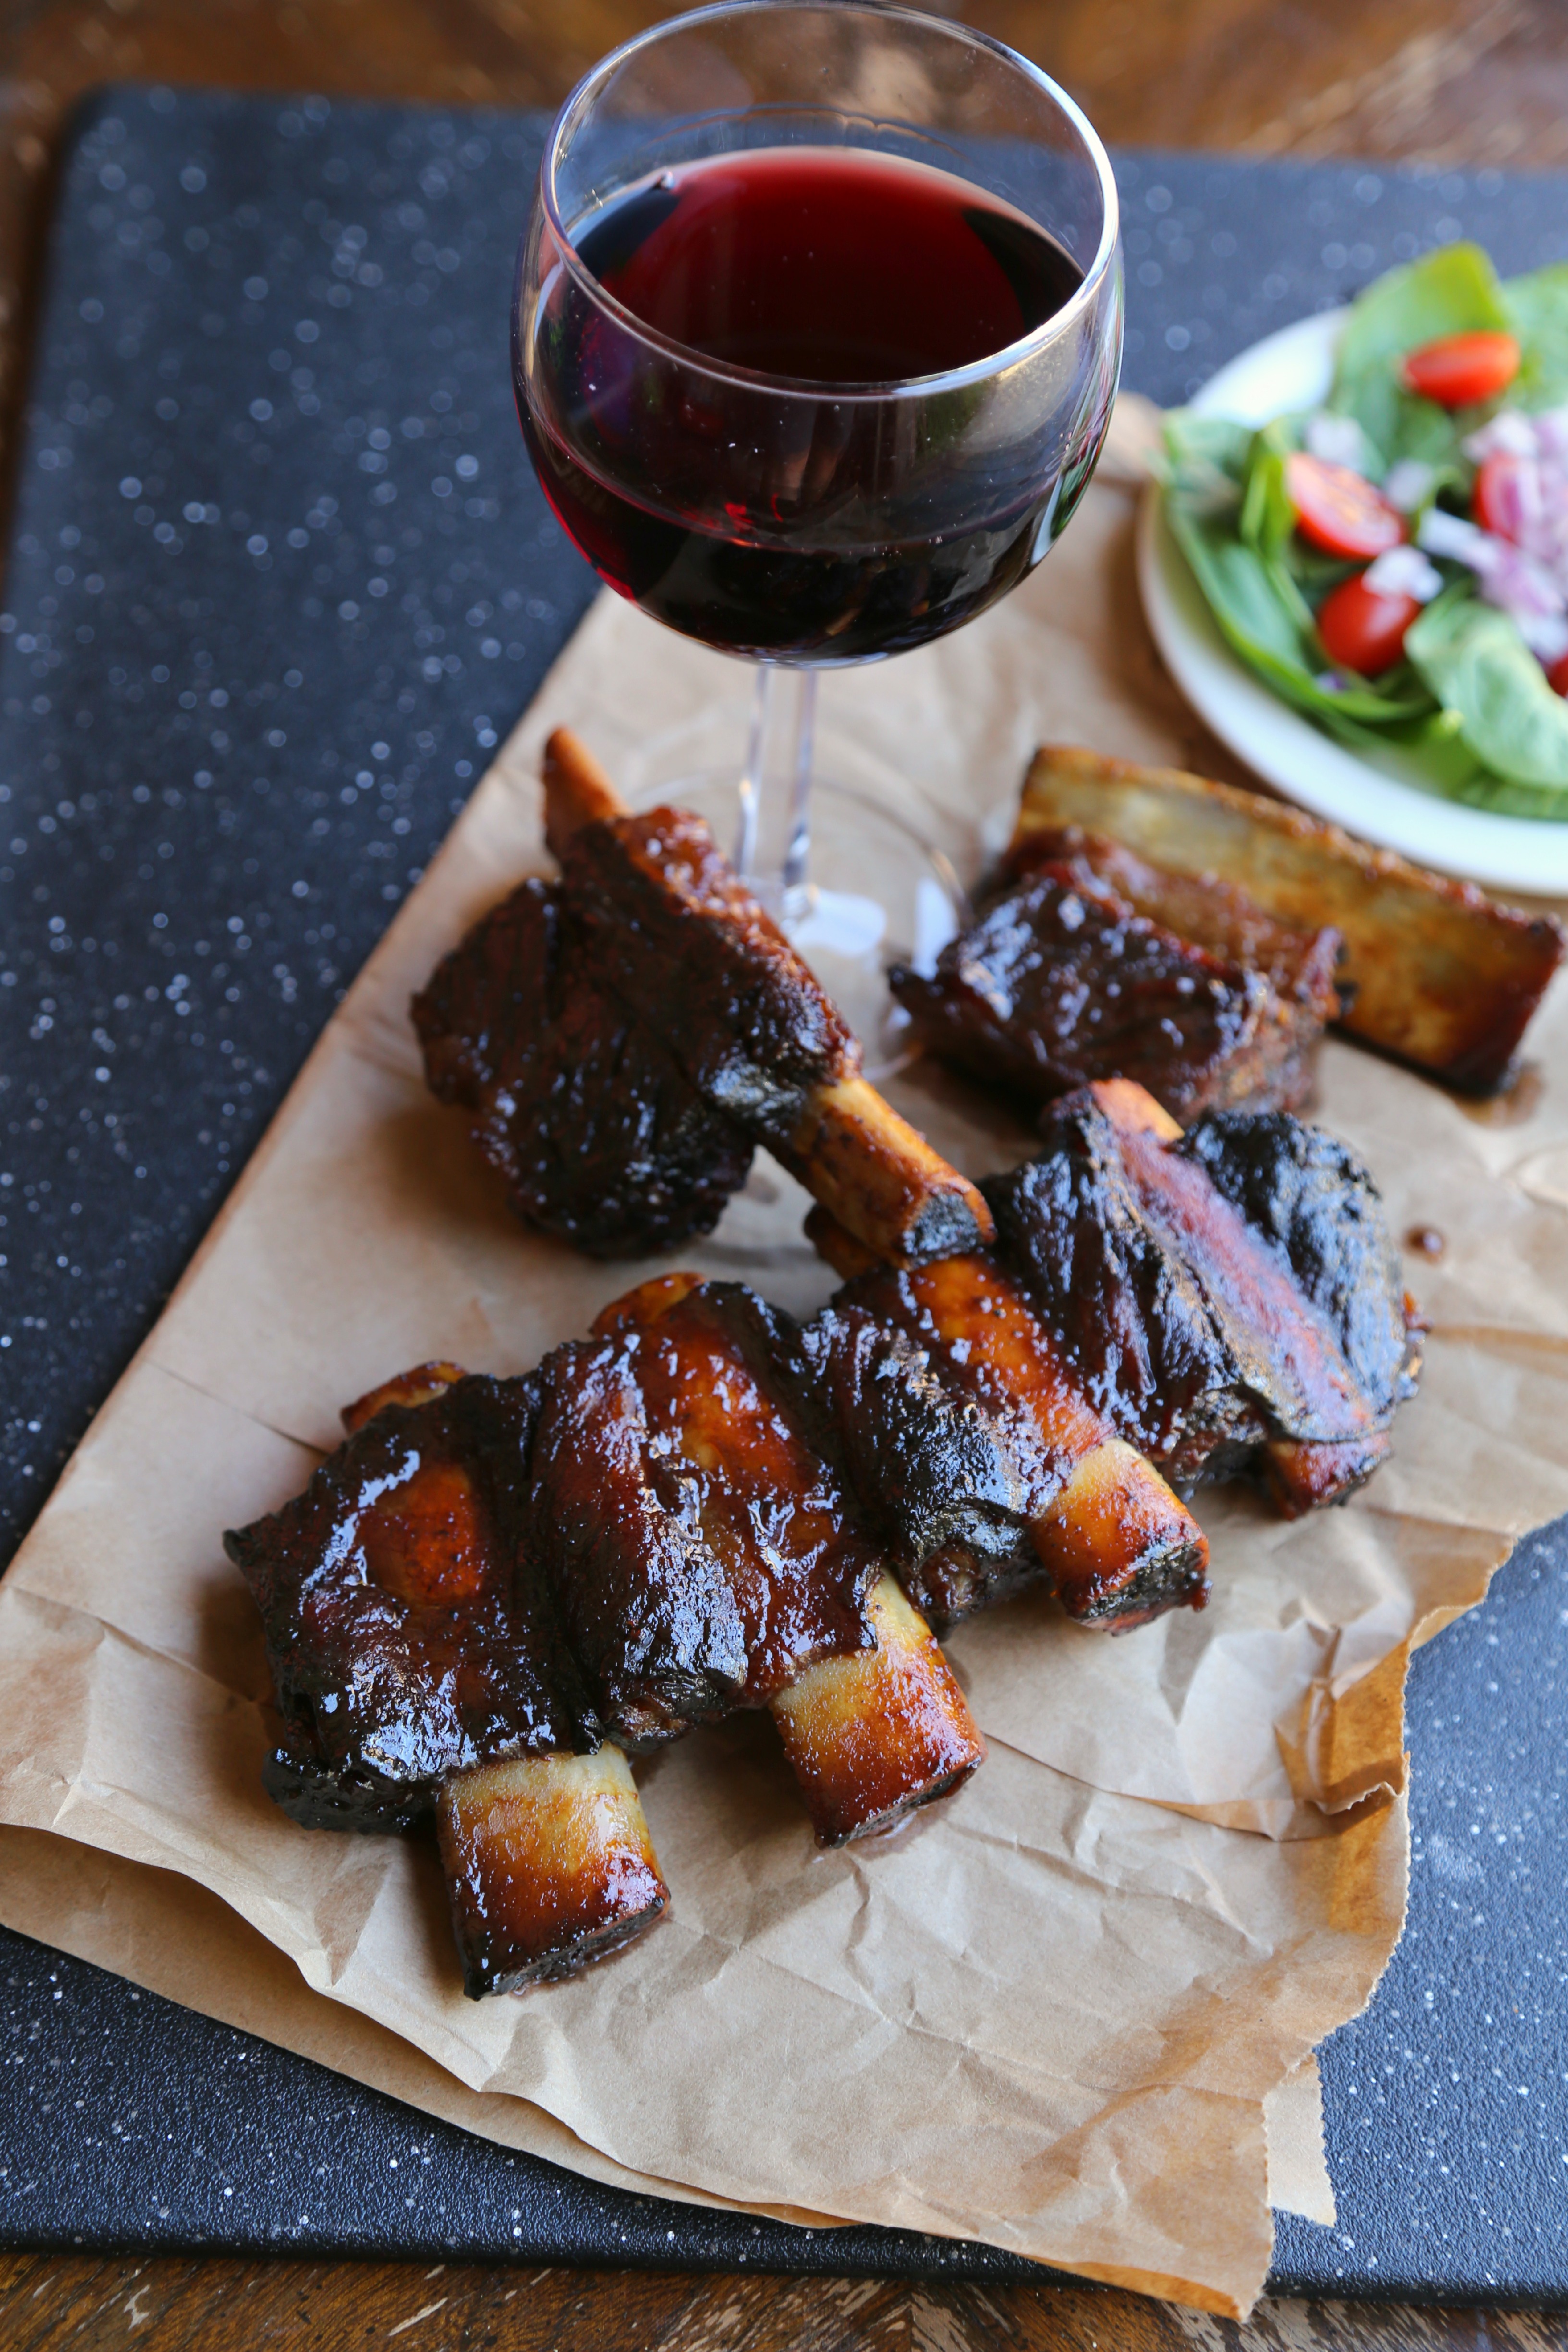 These tamarind oven baked ribs are lip-smacking, finger-lickin’ amazing!